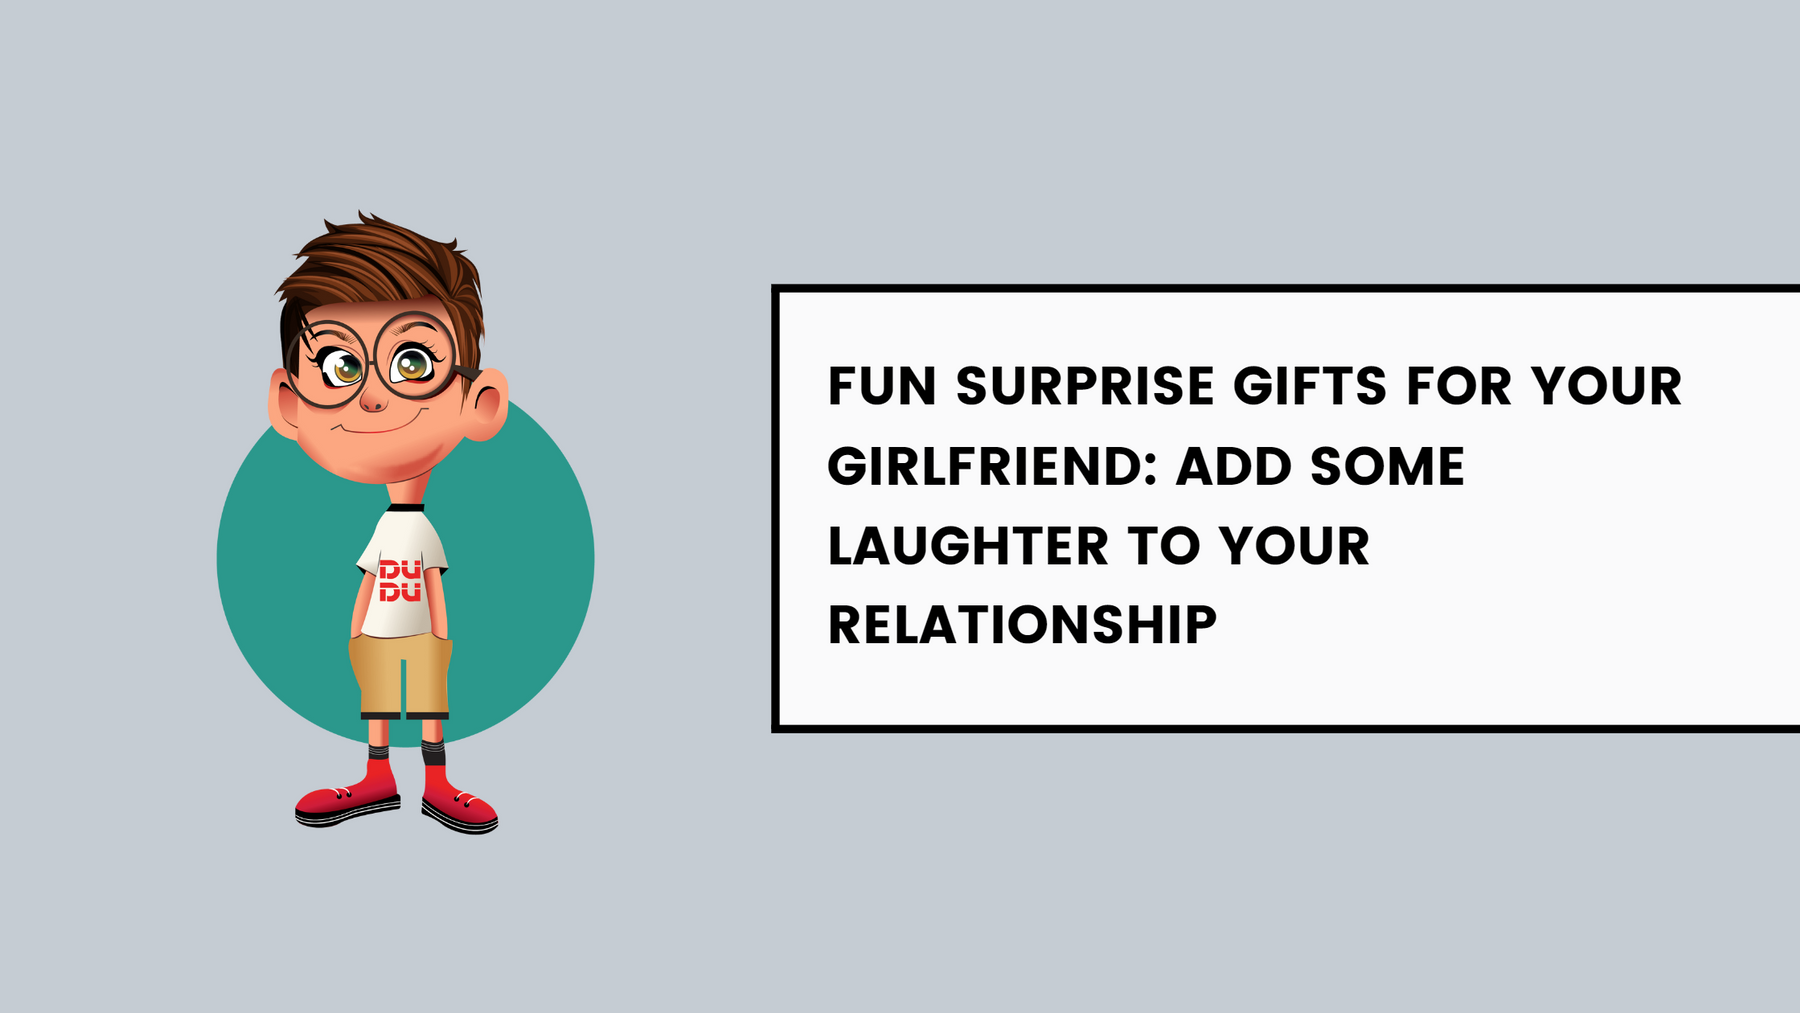 Fun Surprise Gifts For Your Girlfriend: Add Some Laughter To Your Relationship